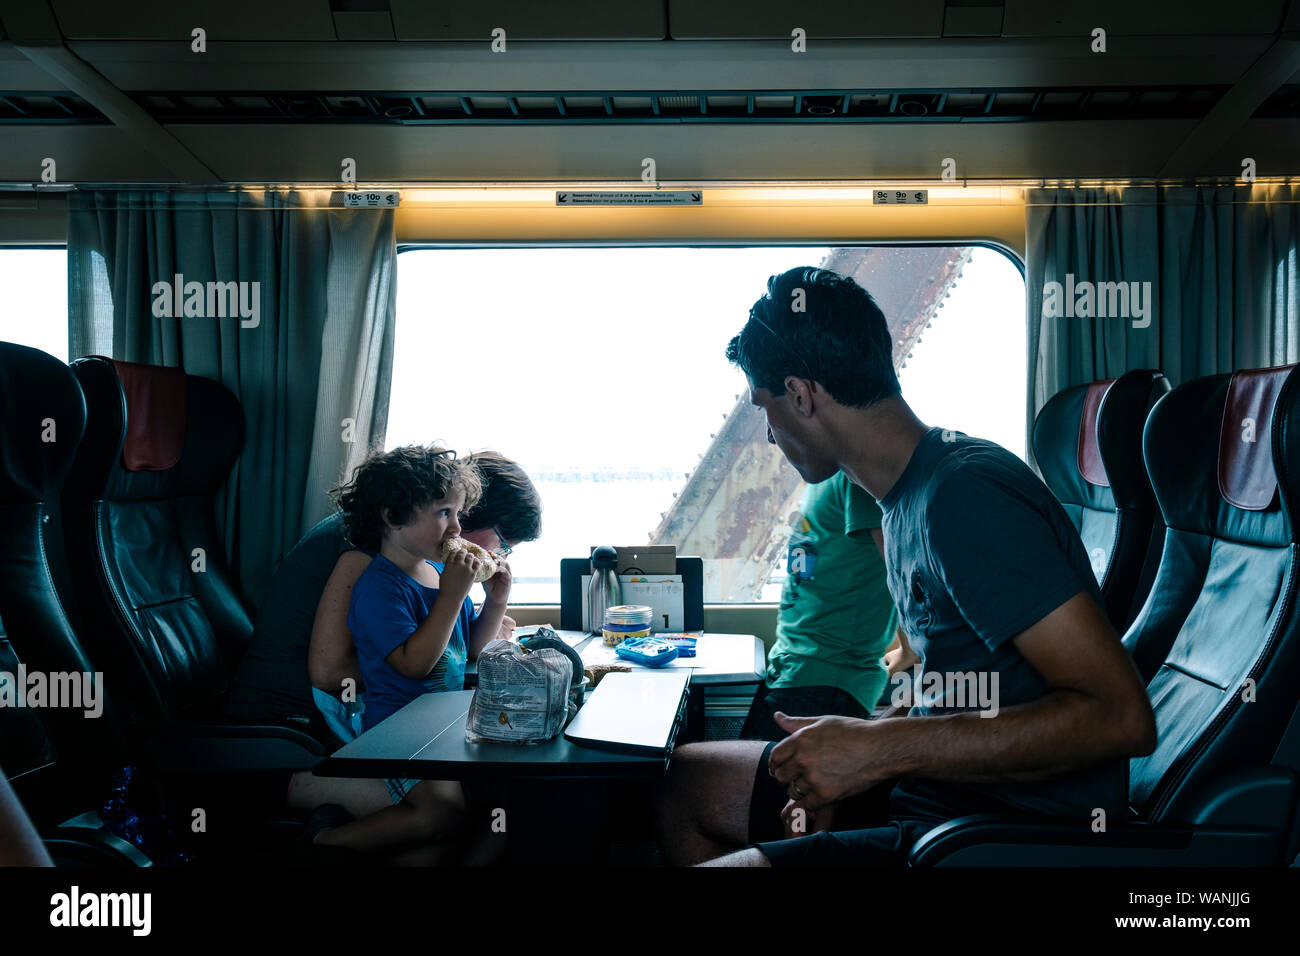 Family Relaxing On Voyage en Train Banque D'Images